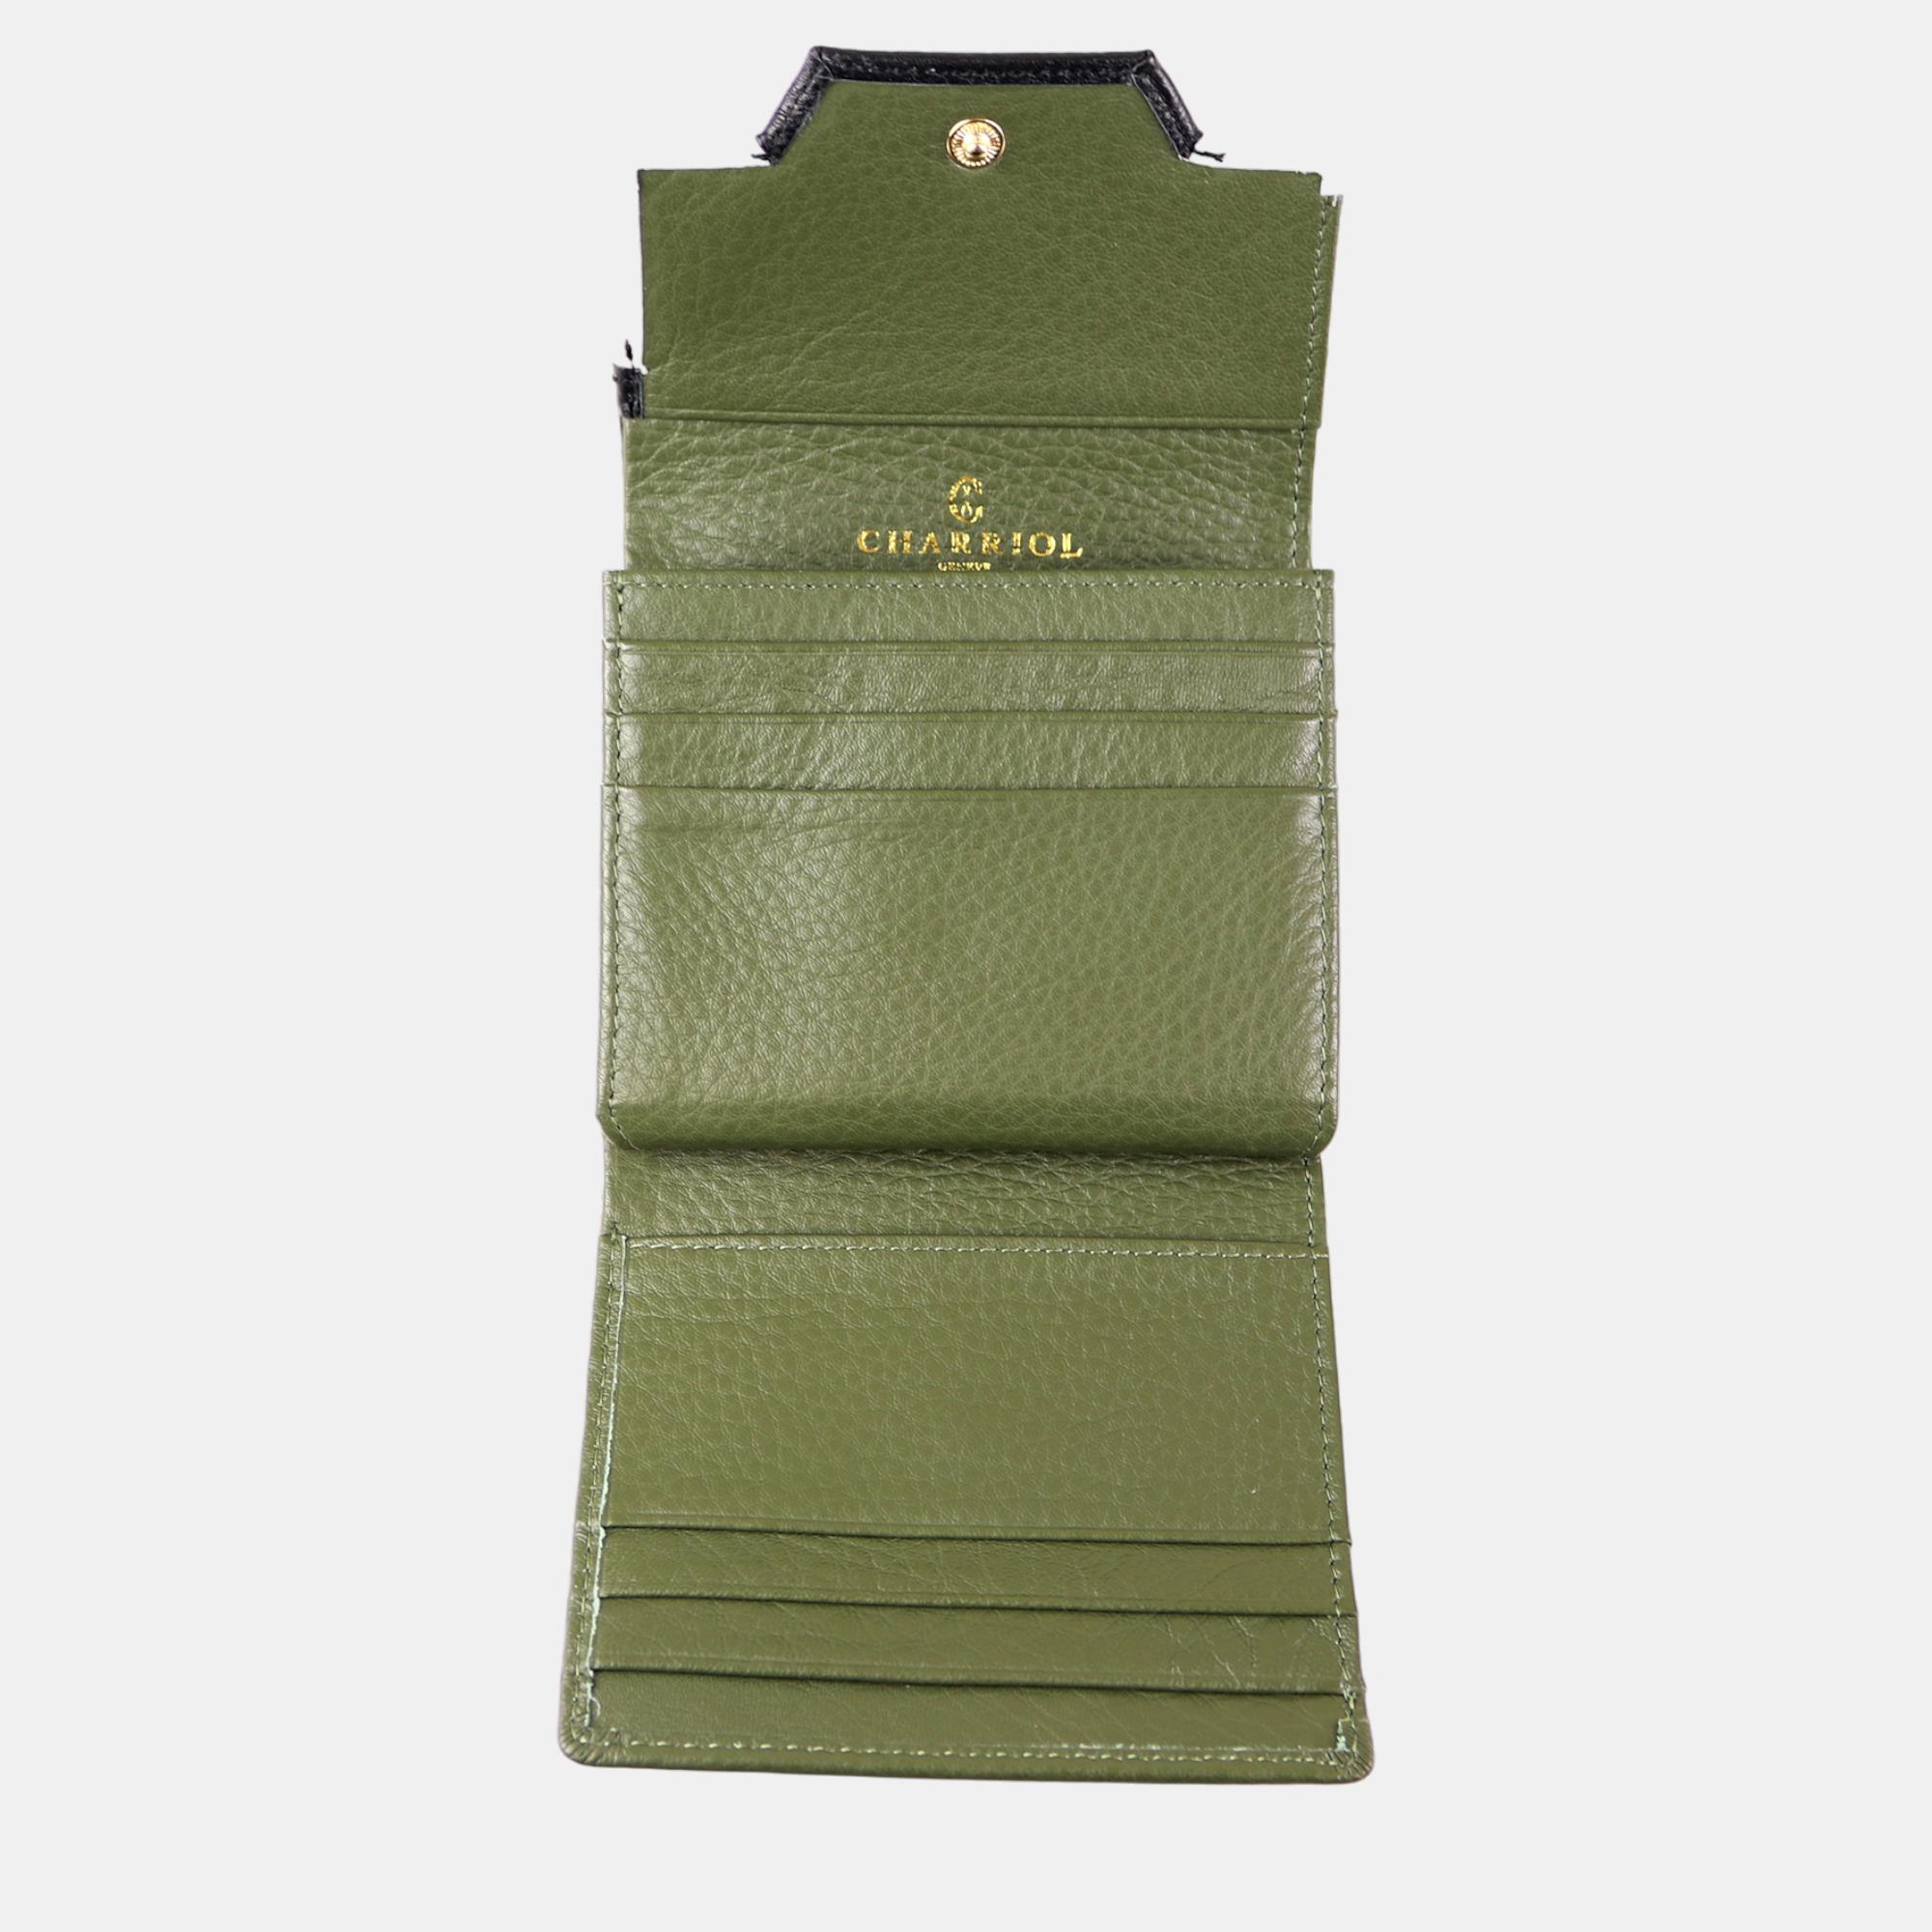 Charriol Green/Cream Leather Forever Wallet